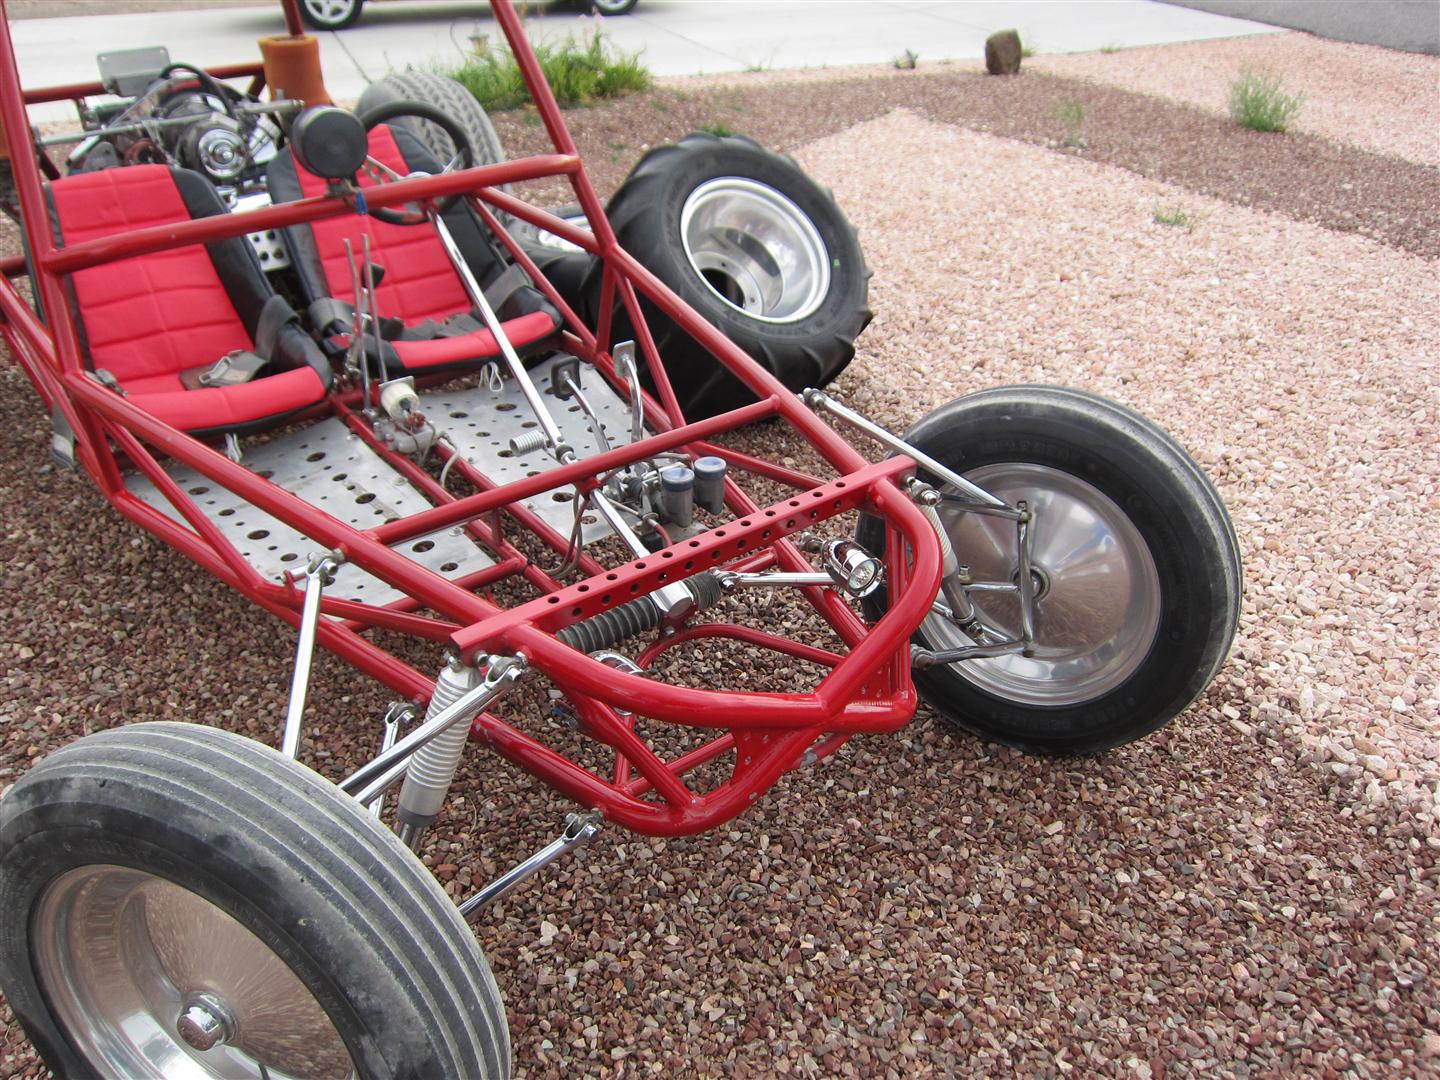 Mazzone mid-engine buggy - Sandrails dune buggy a arms. 